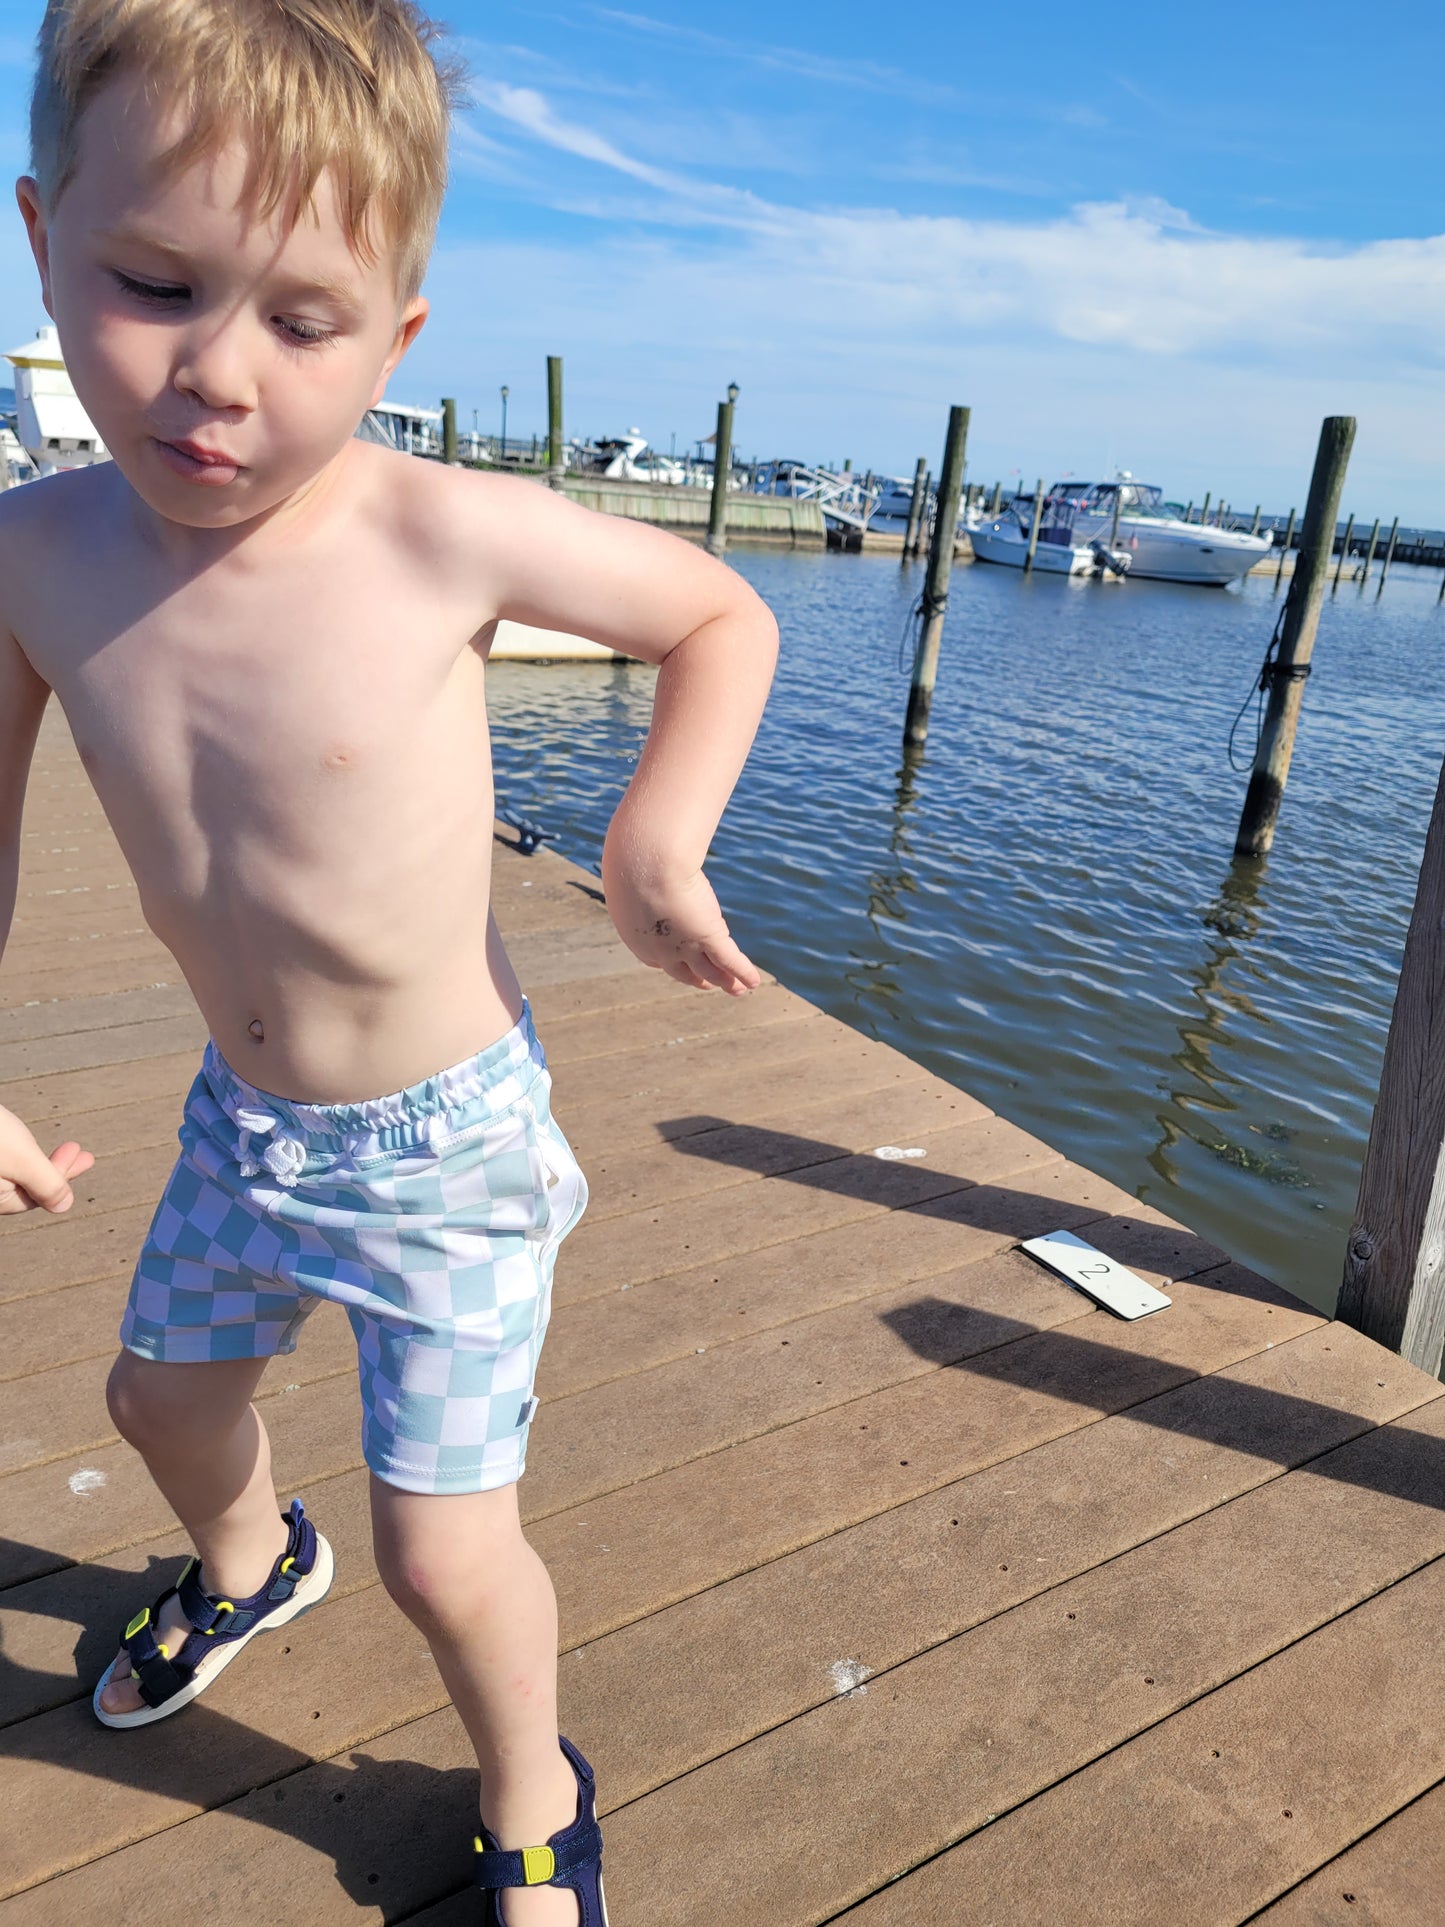 Toddler wearing Boys white and mint green checkered swim shorts, dancing on marina dock.